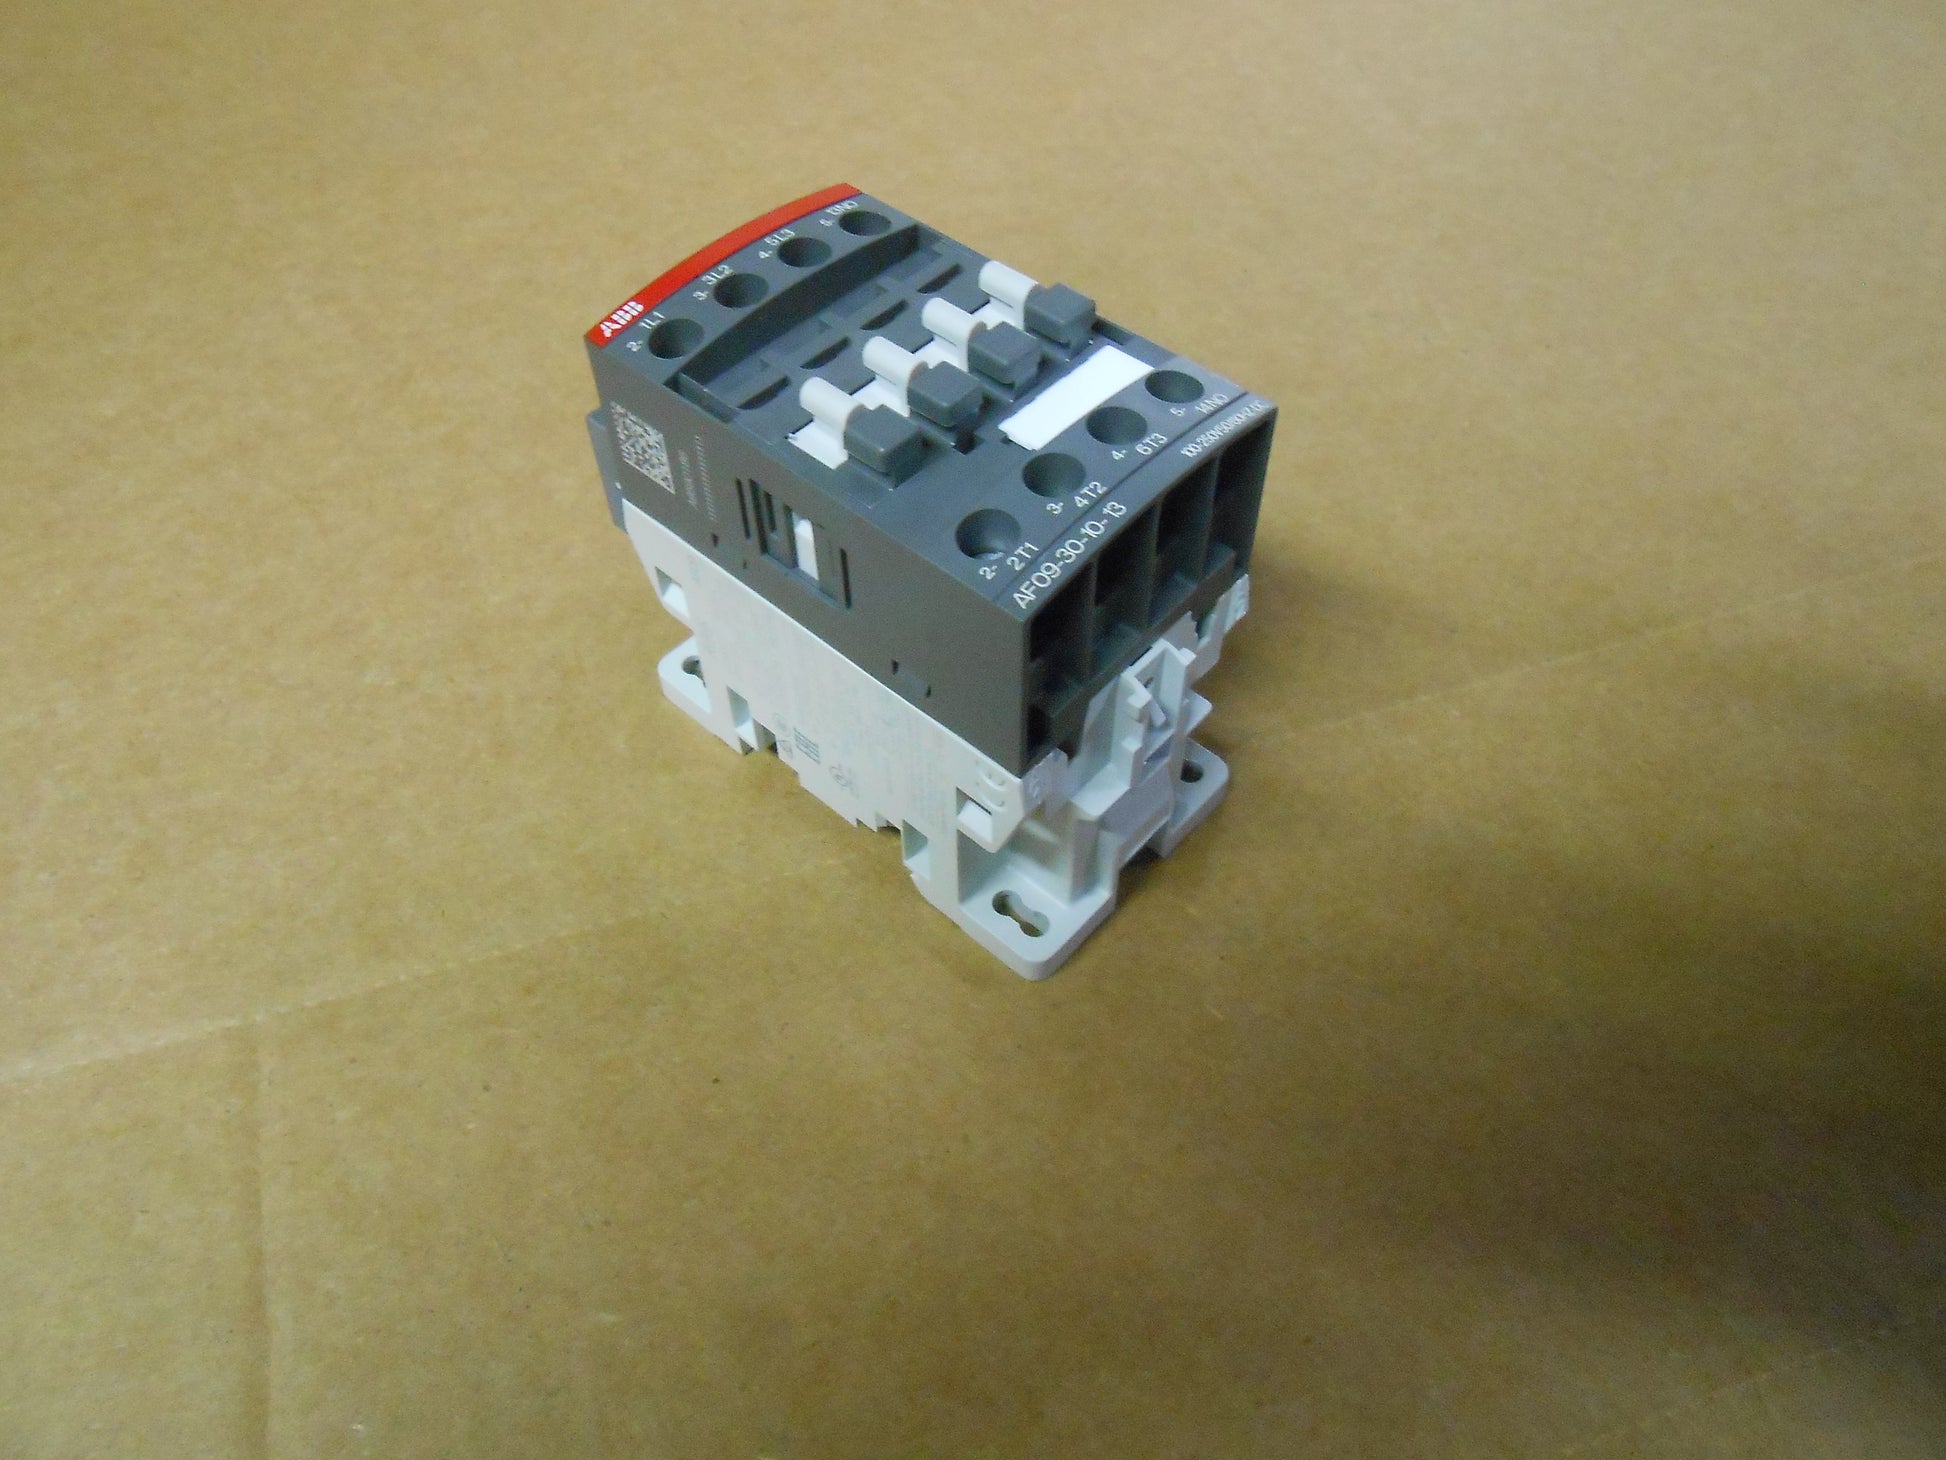 3 POLE 25 AMP CONTACTOR WITH SUPPRESSOR